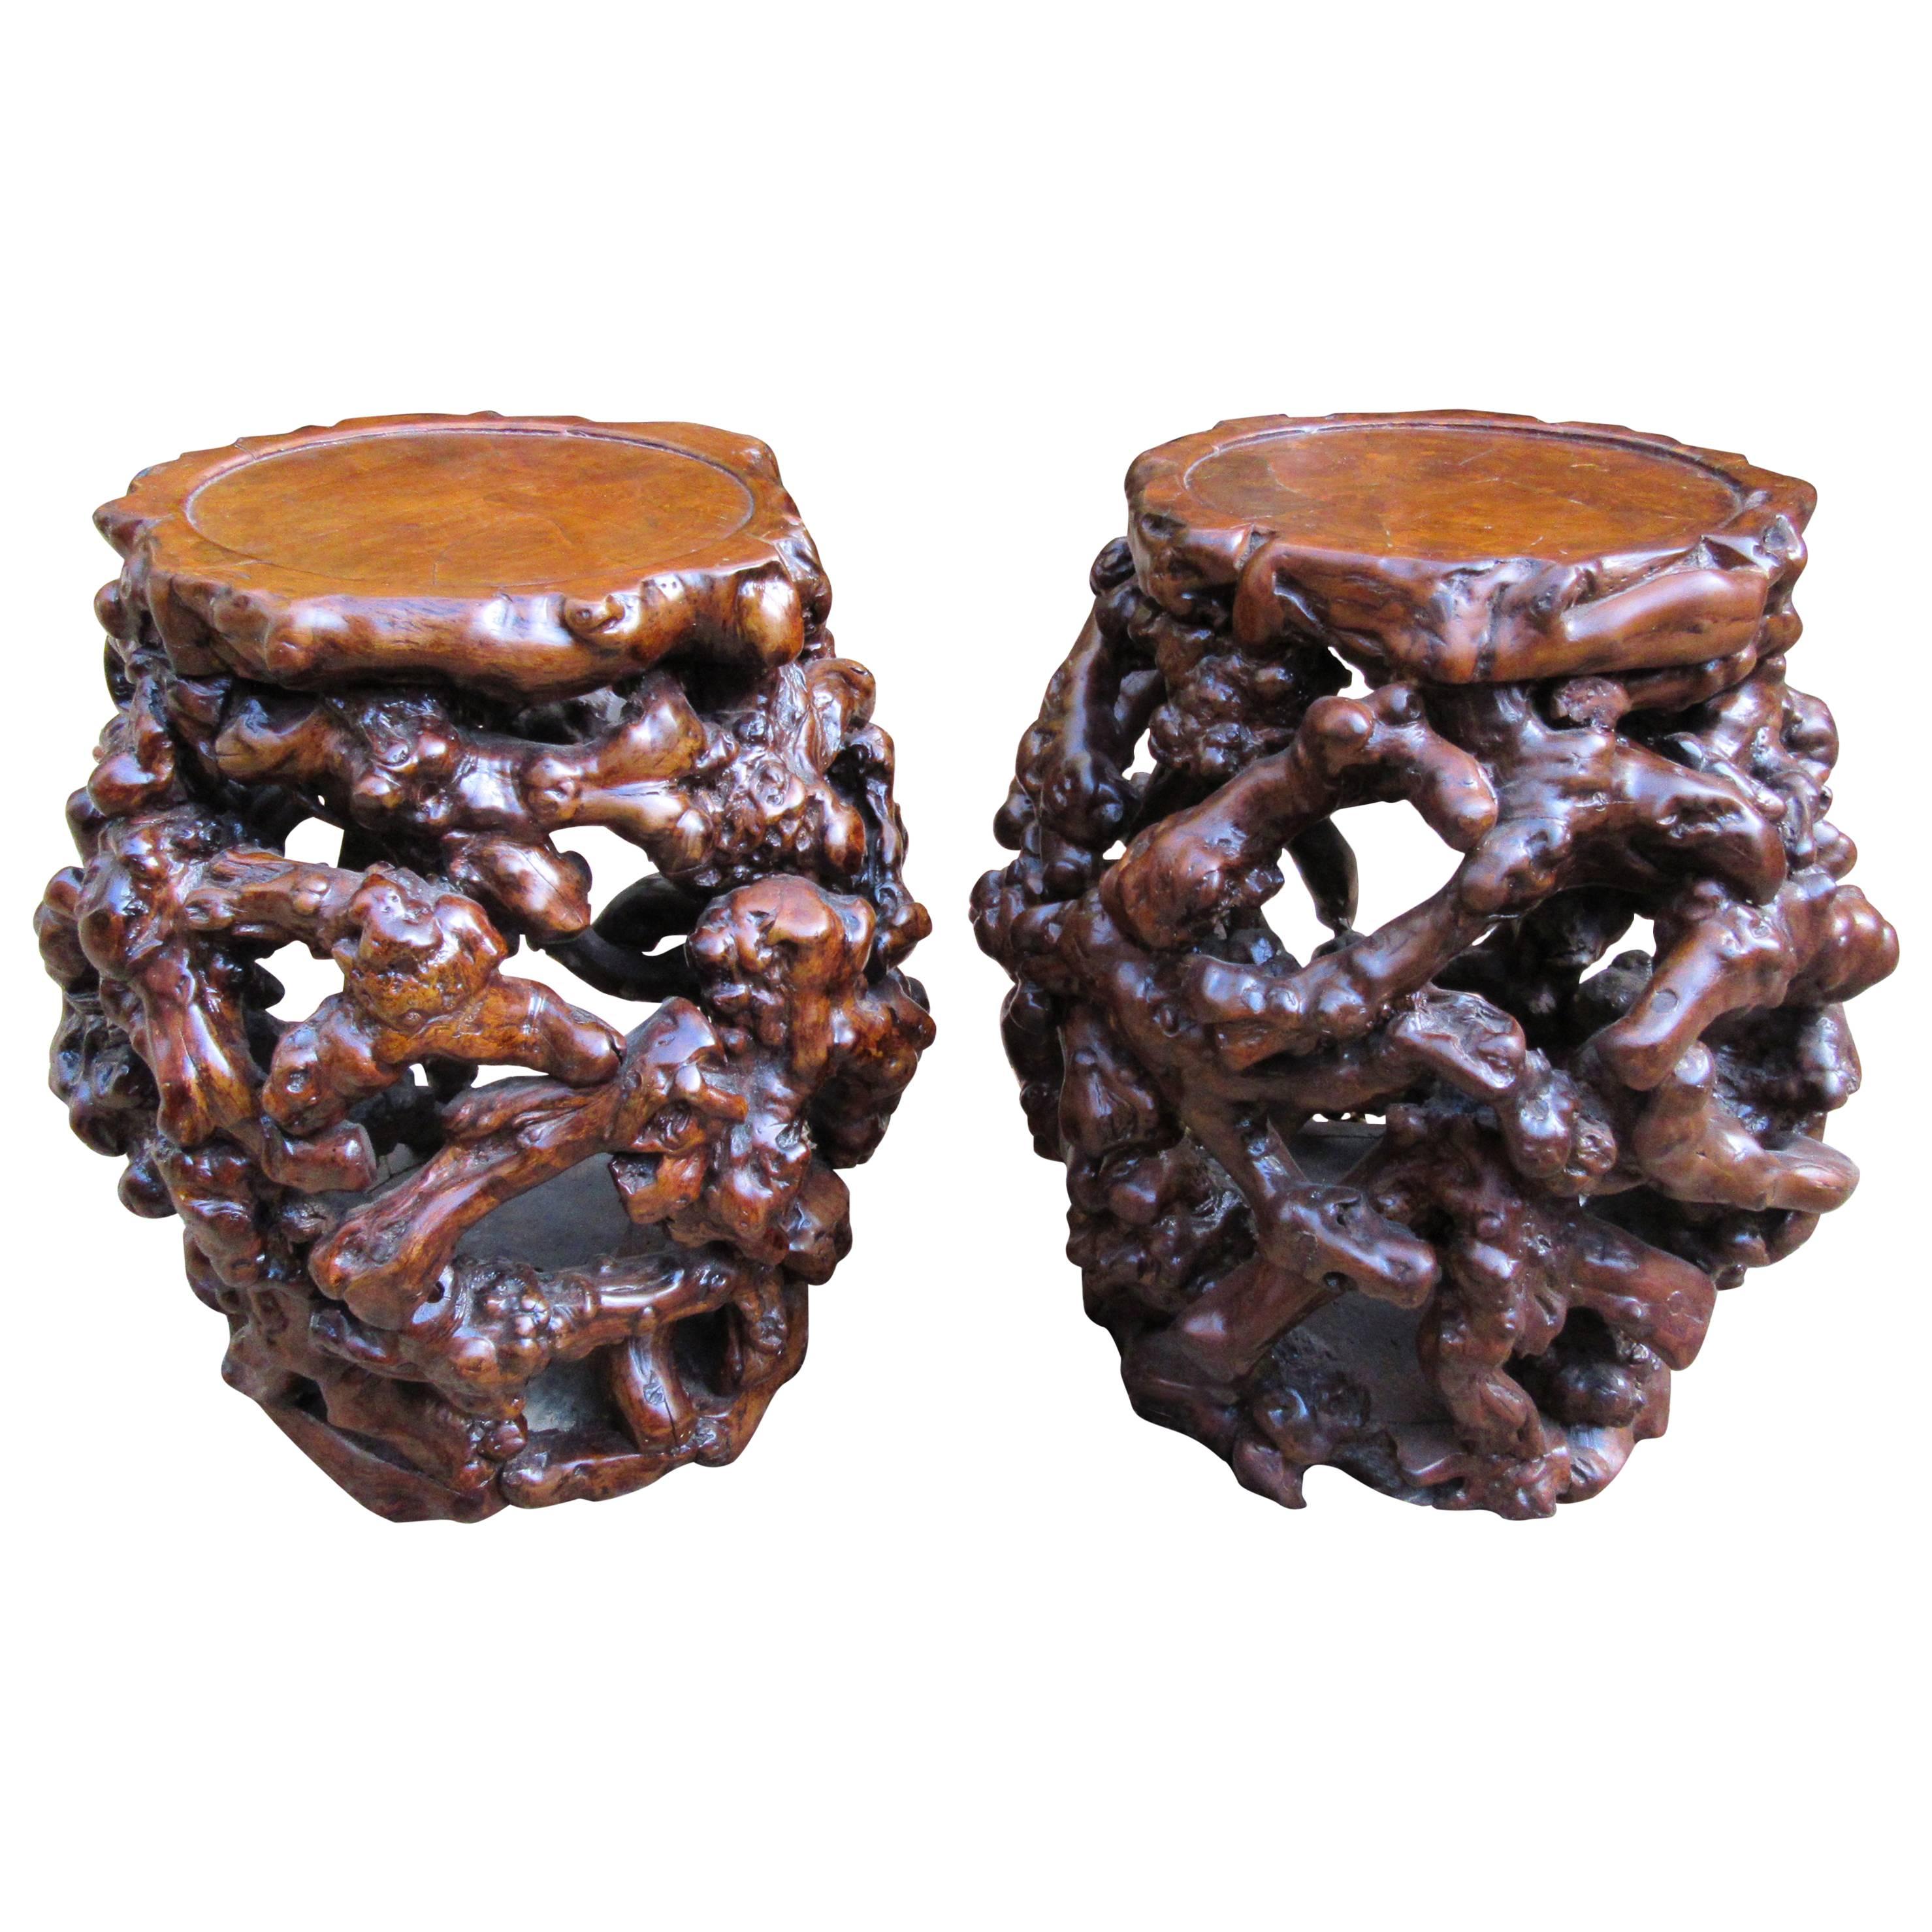 Rare Pair of Chinese Root Stools or Tables, Early 20th Century